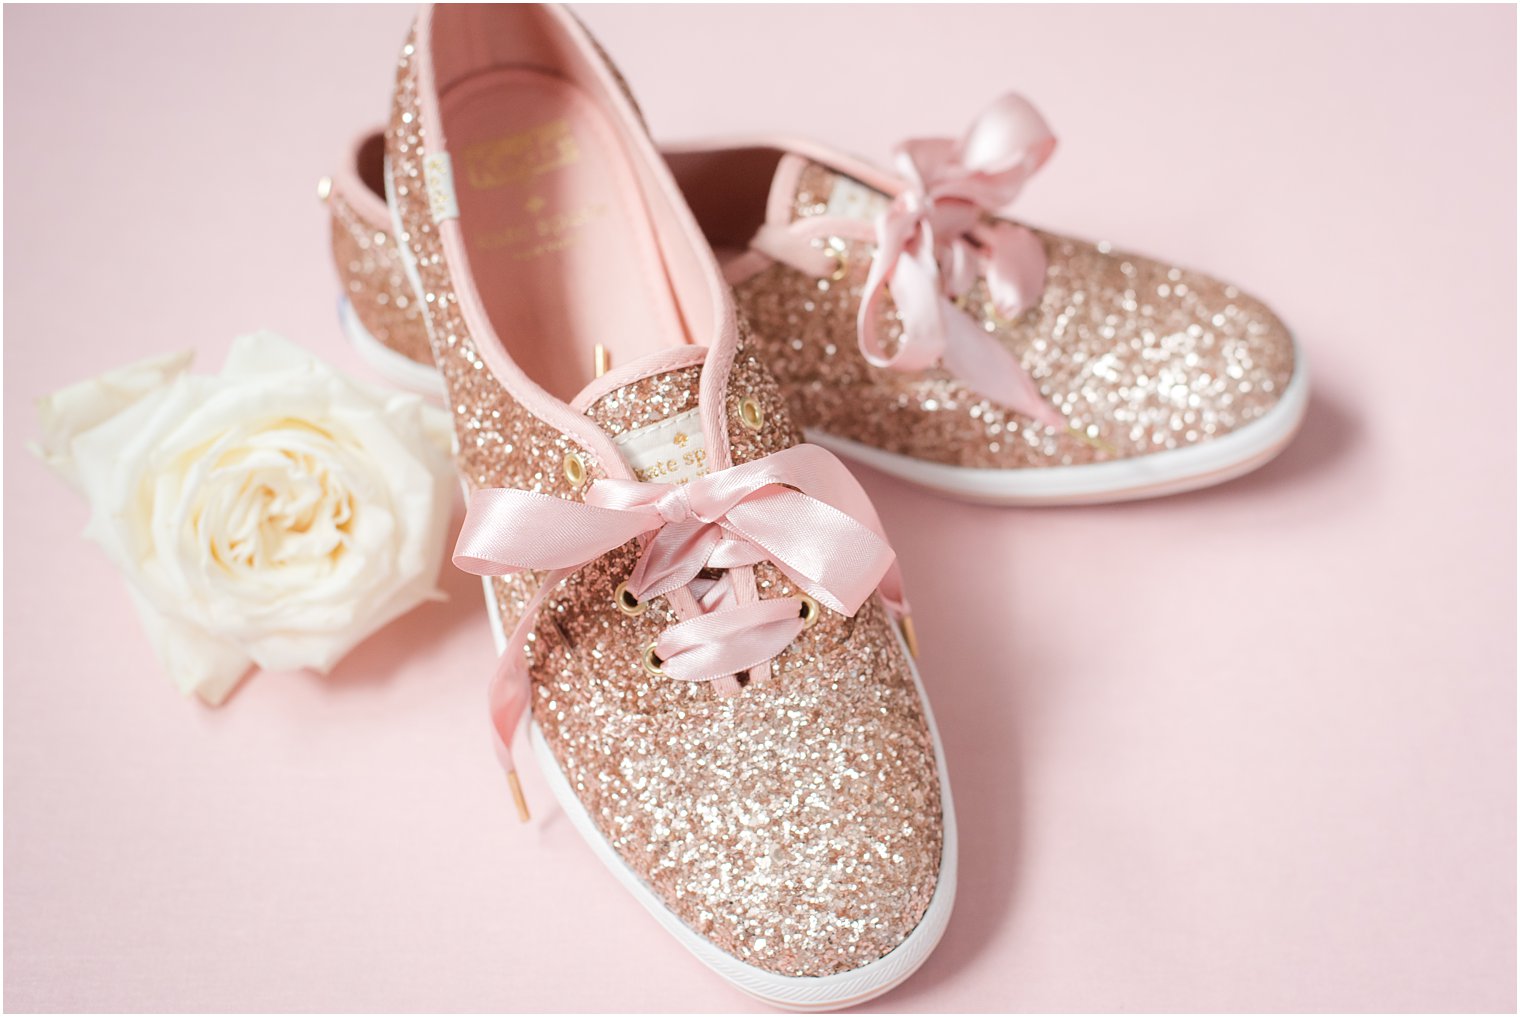 Keds by Kate Spade rose gold glitter sneakers